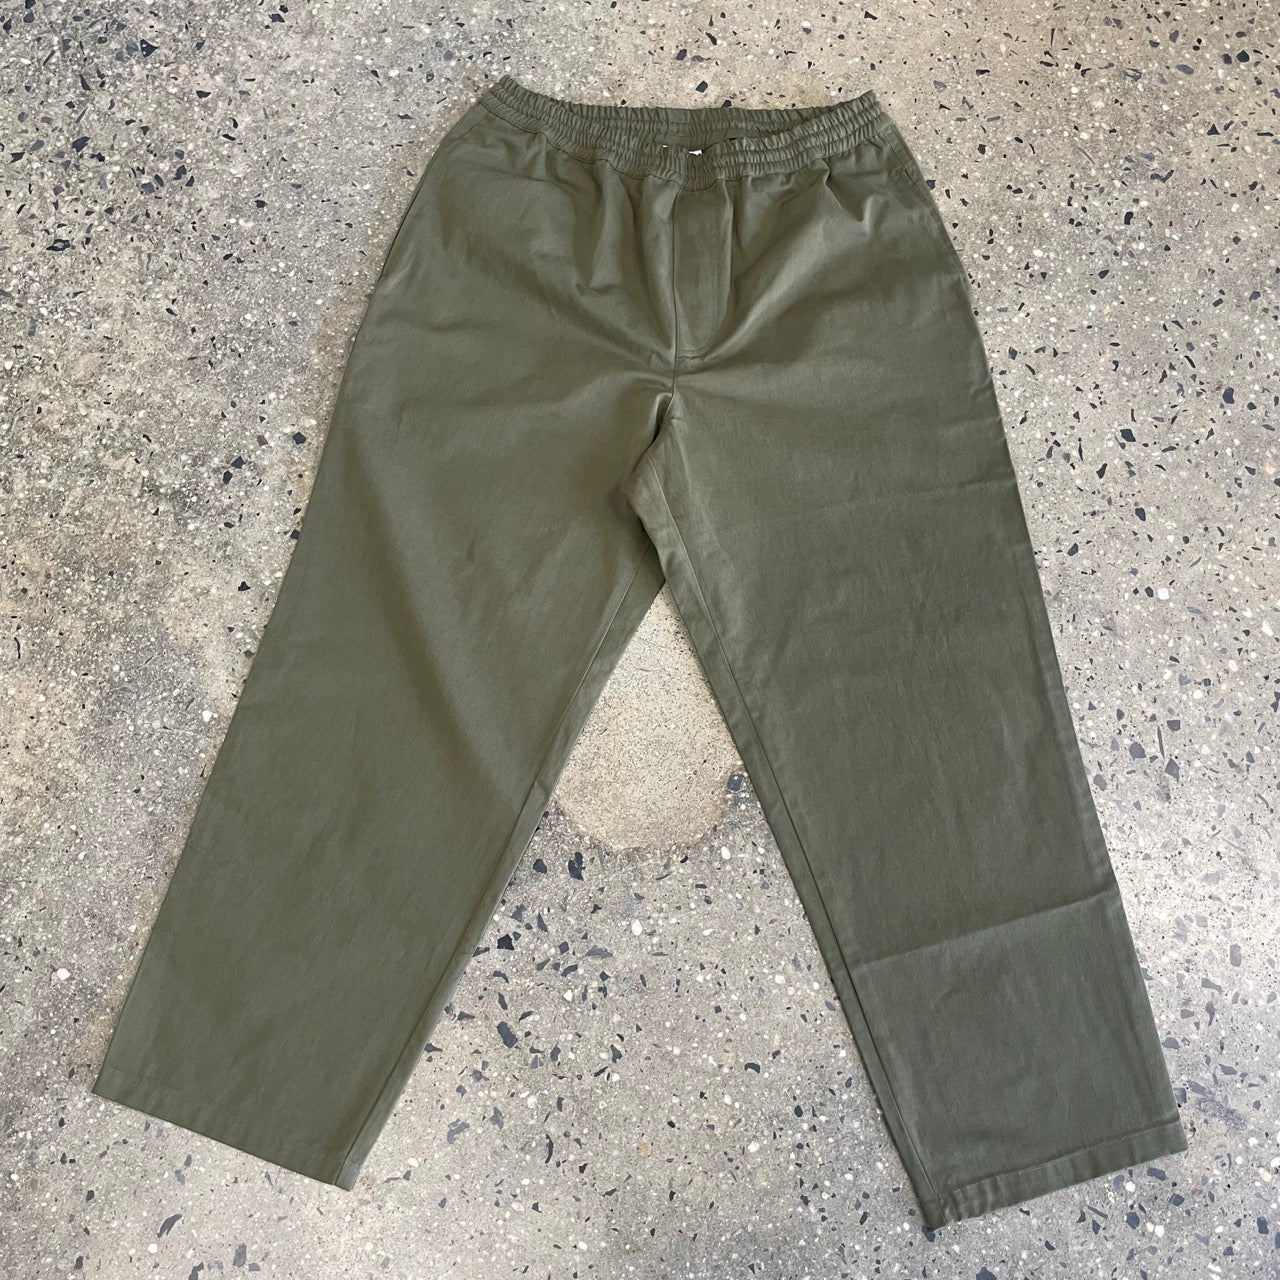 Shop Olive Green Regular Fit Cotton Trousers For Women